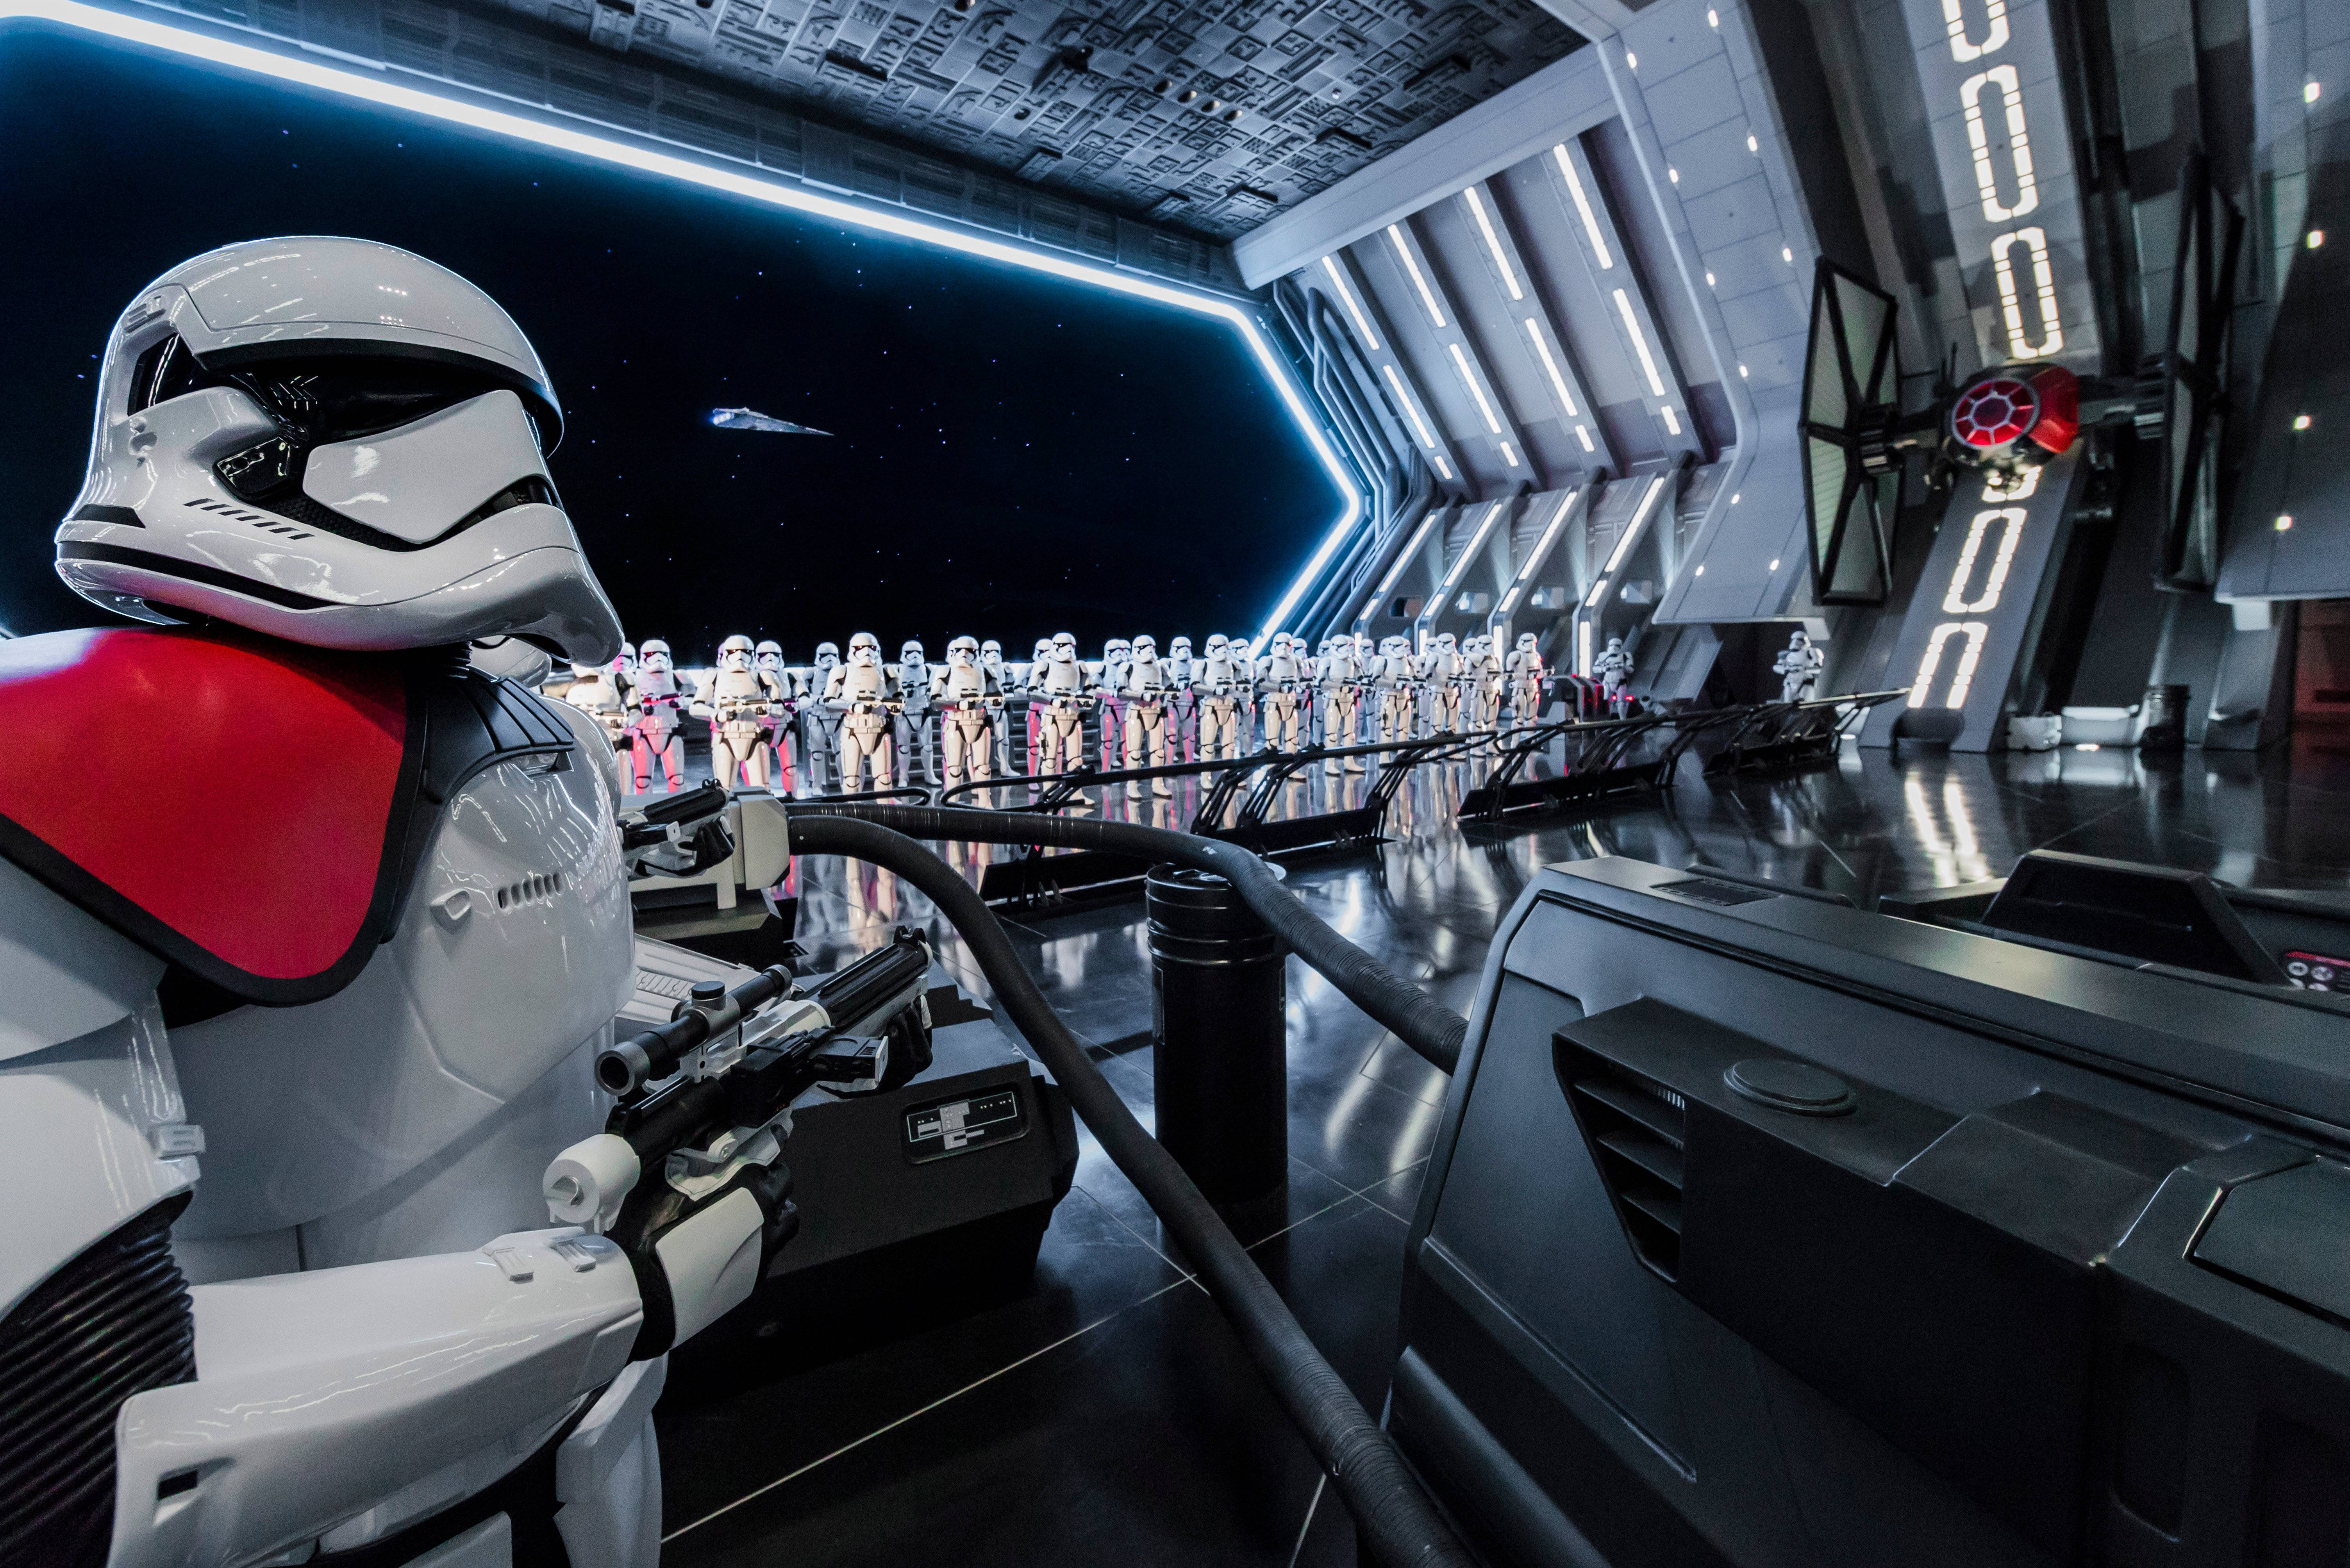 Virtual Queue returns to Star Wars Rise of the Resistance for Disney Jollywood Nights